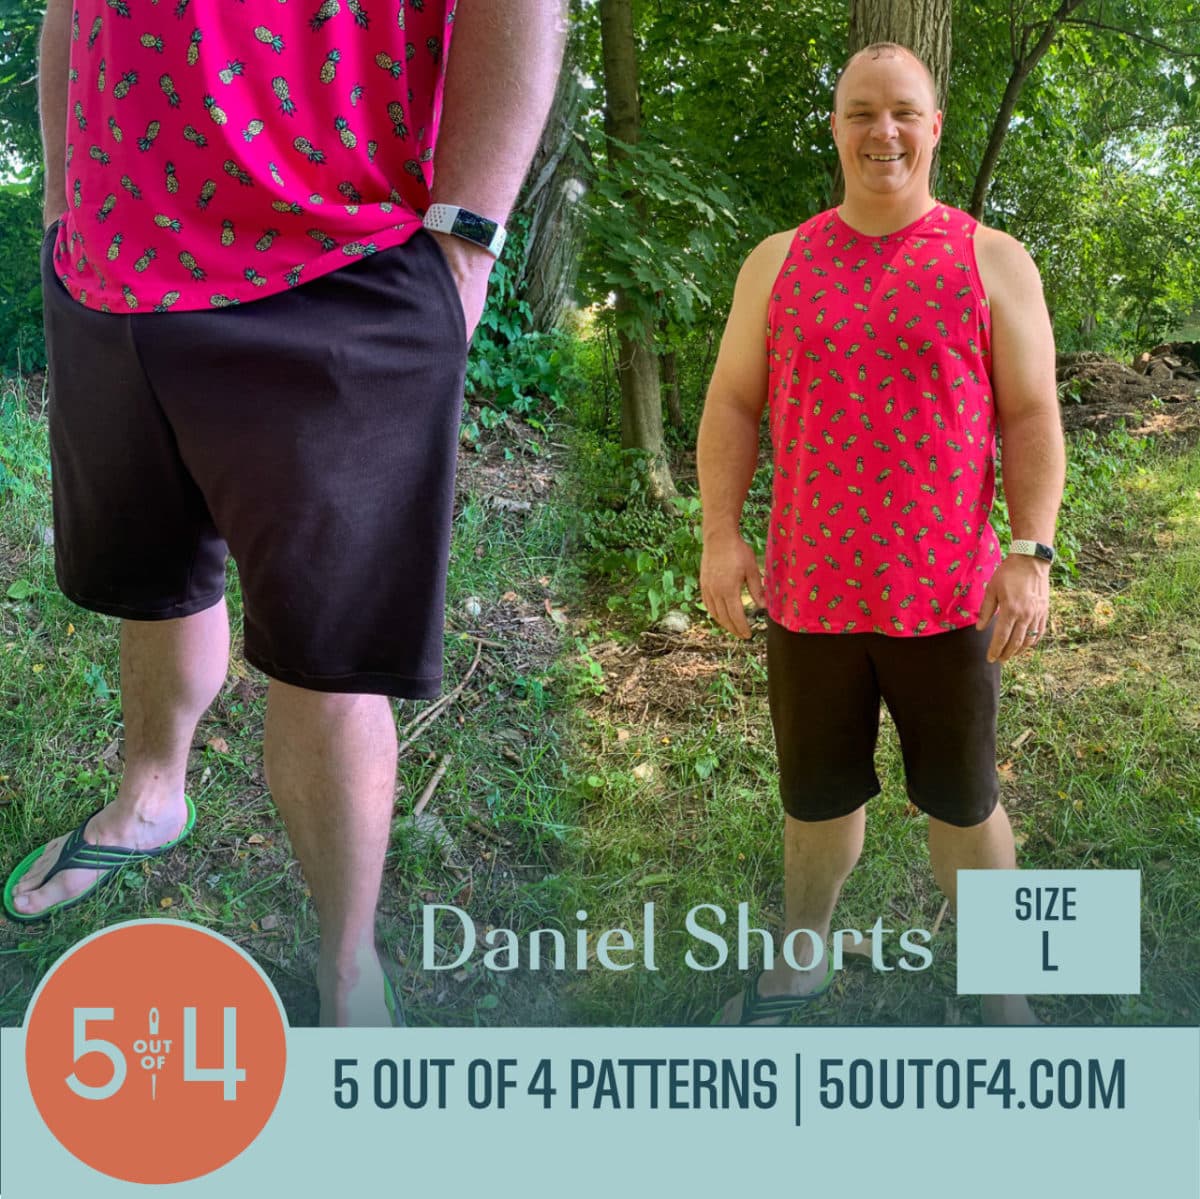 Andy Tank and Daniel Shorts Bundle - 5 out of 4 Patterns